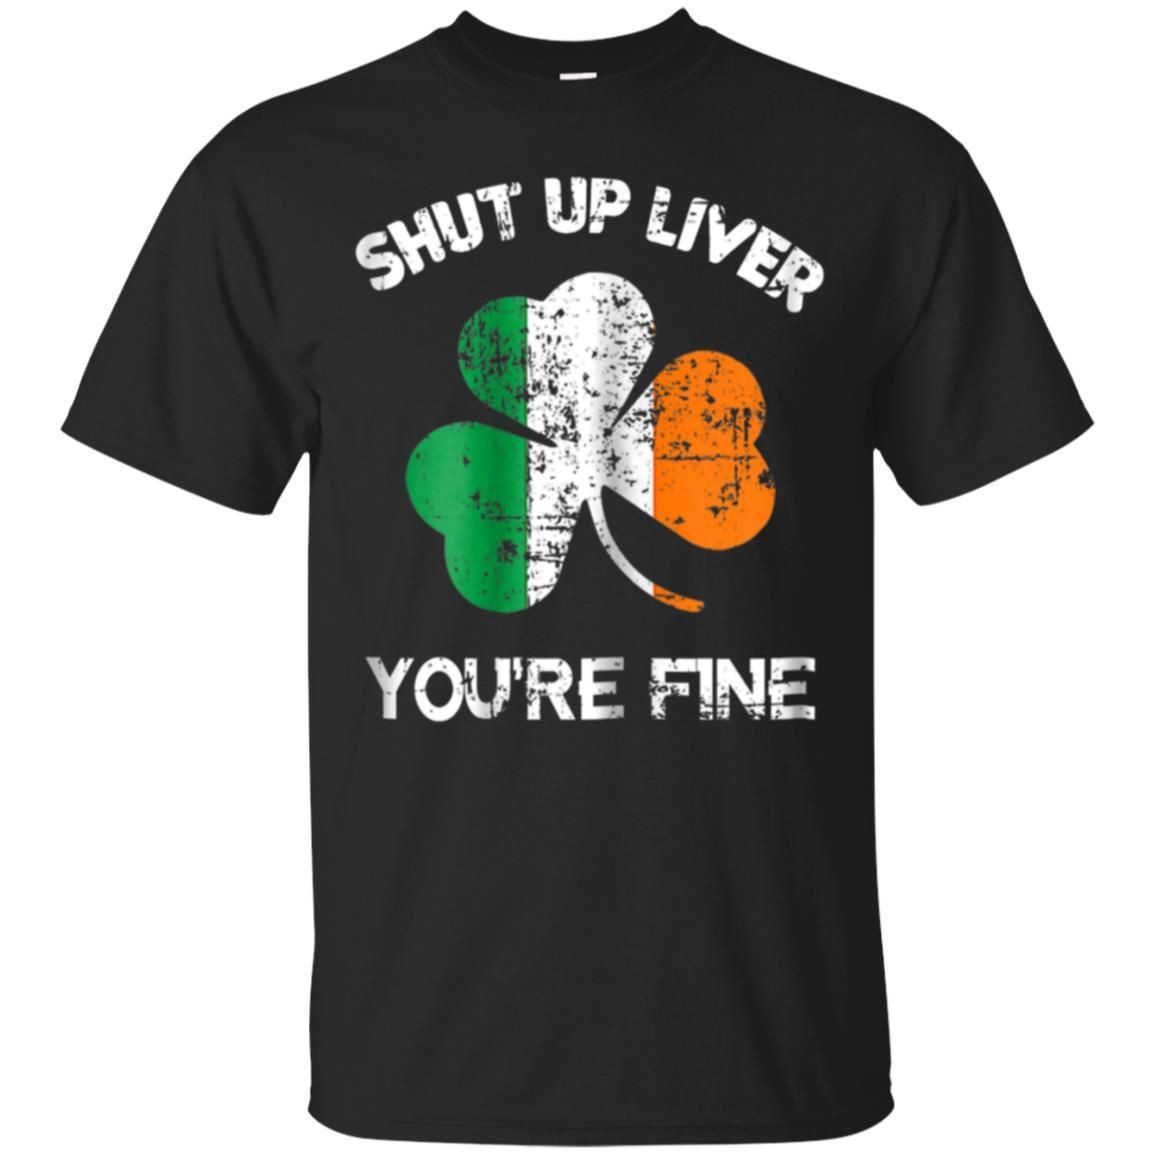 St Patrick's Day Drinking Quotes
 Awesome womens shut up liver you re fine st patrick s